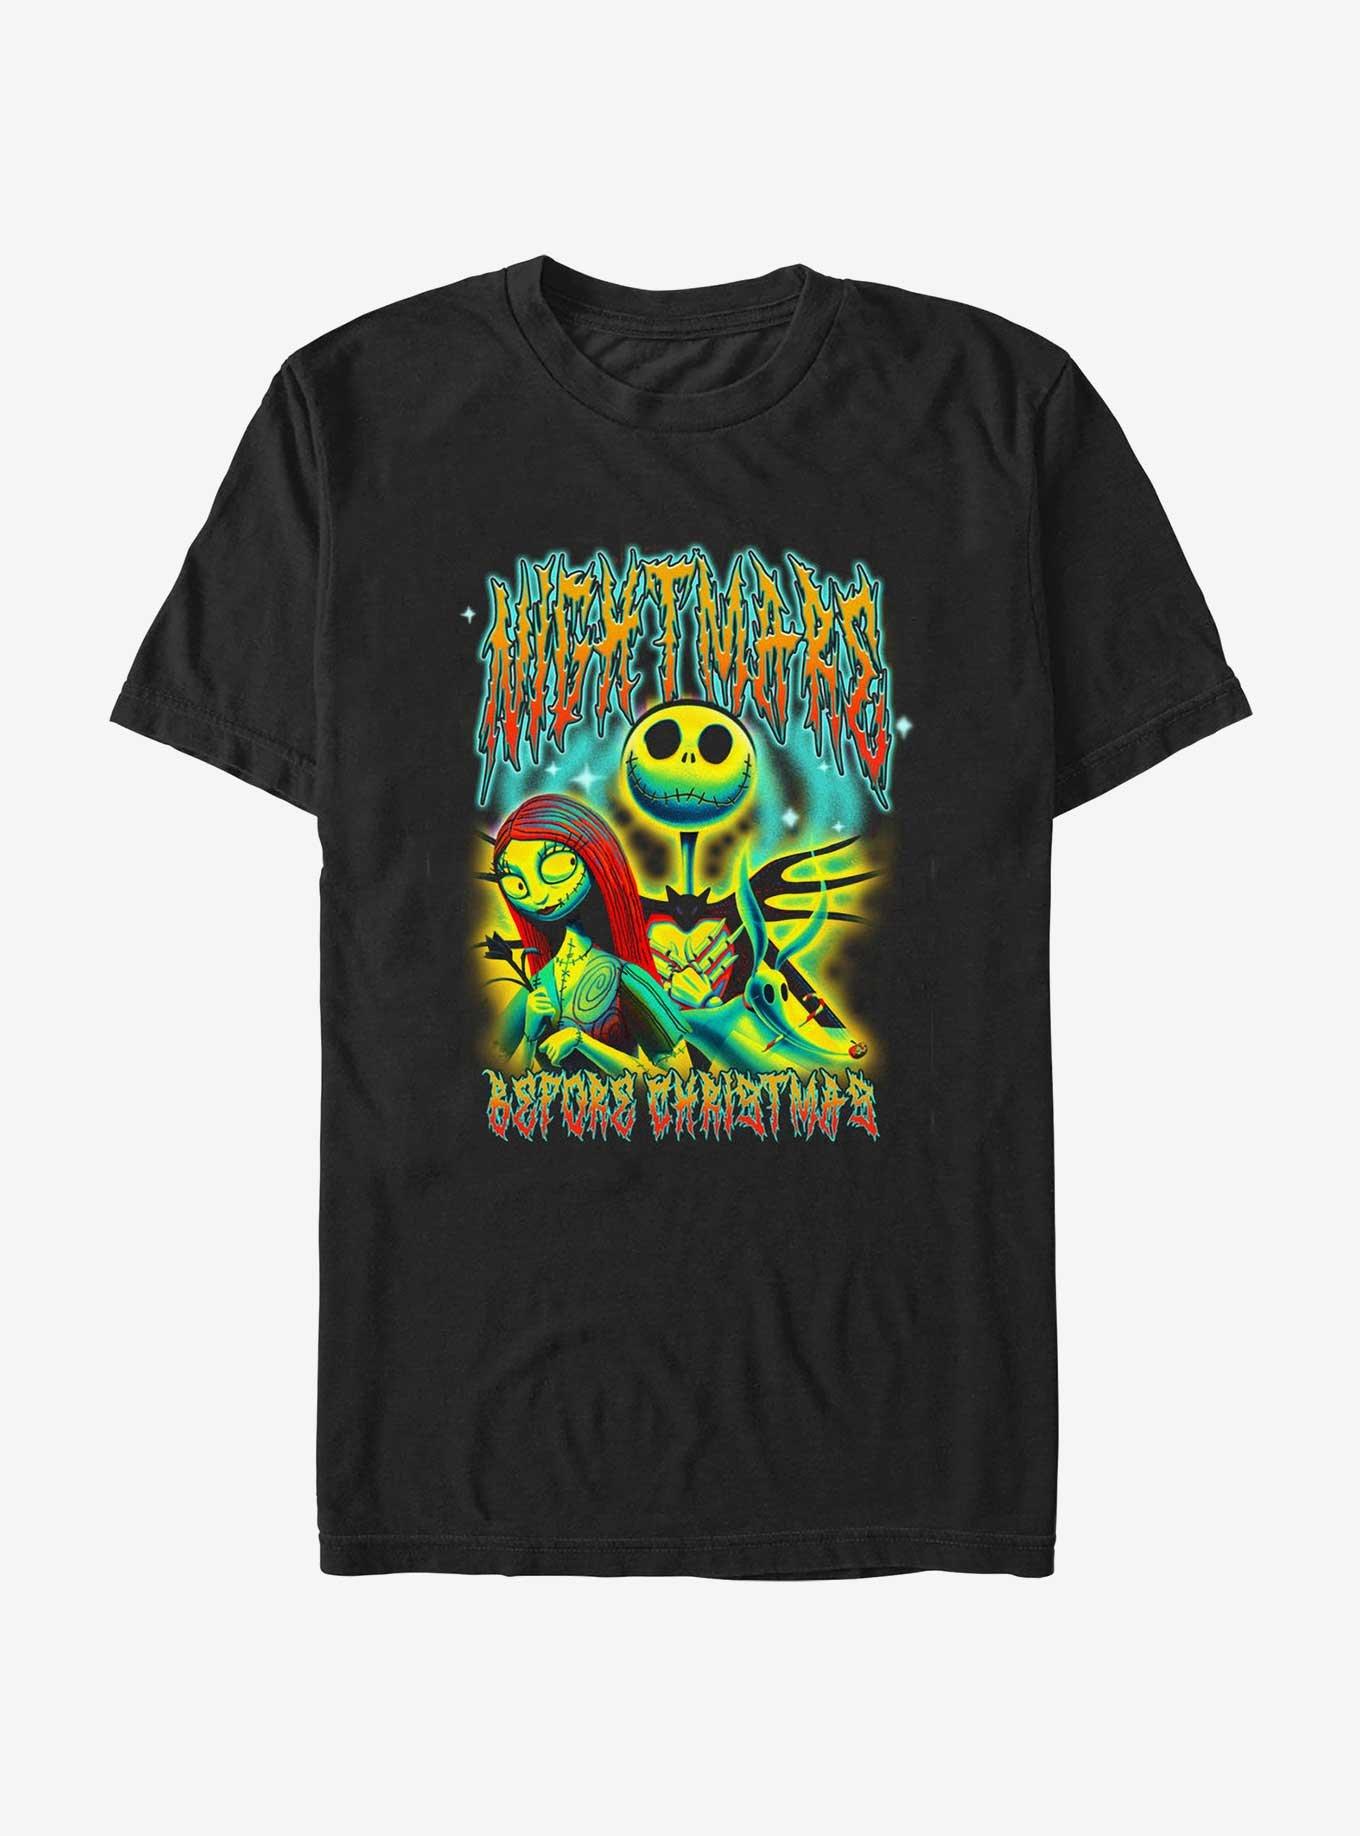 Disney The Nightmare Before Christmas Spooky Group T-Shirt, BLACK, hi-res